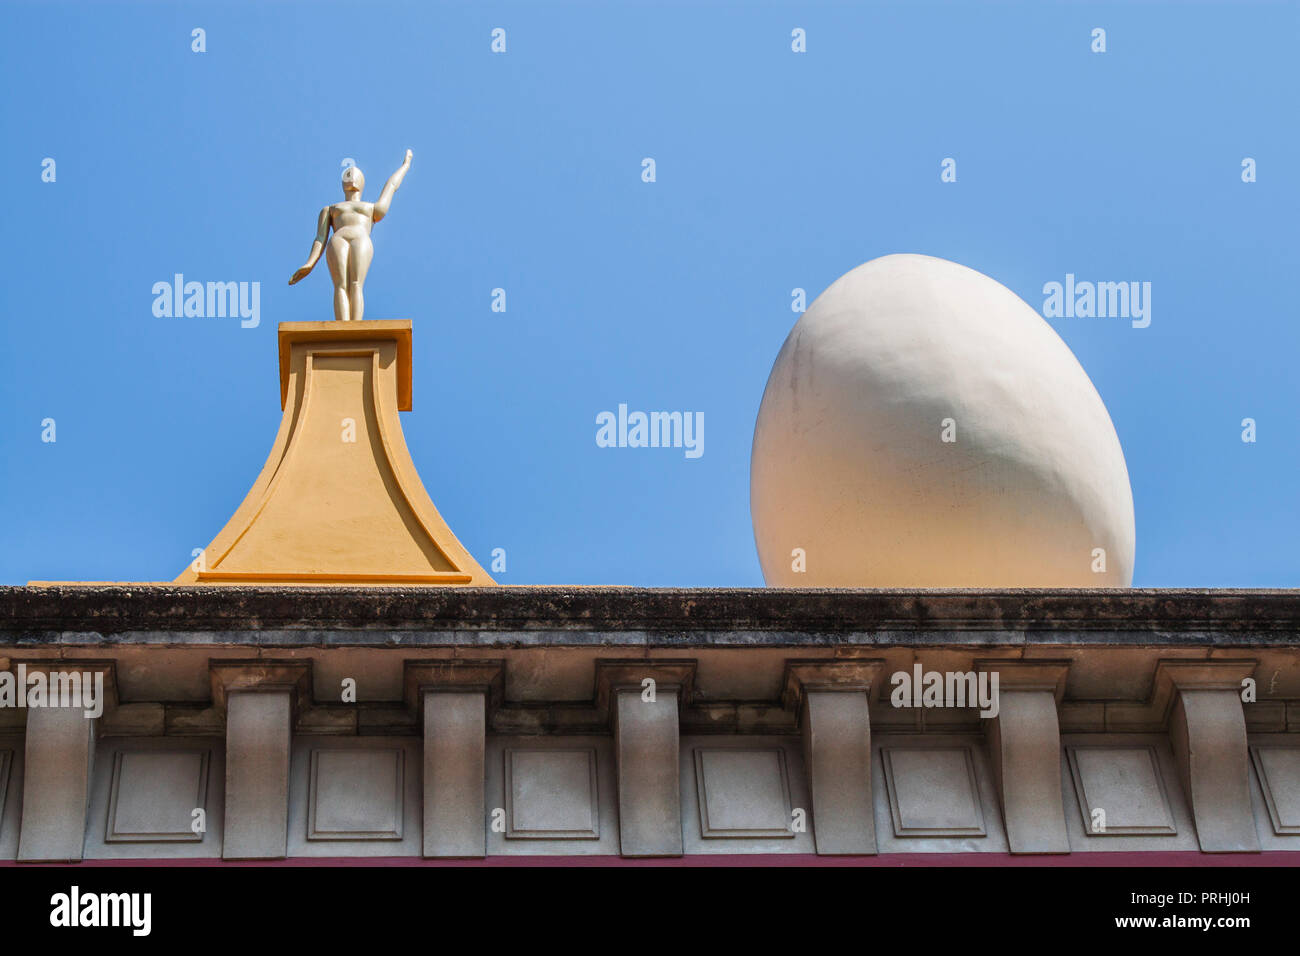 The famous Salvador Dalí Theatre and Museum in Figueres, Catalonia, Spain, Europe. The façade is topped by a series of giant eggs and golden figures. Stock Photo